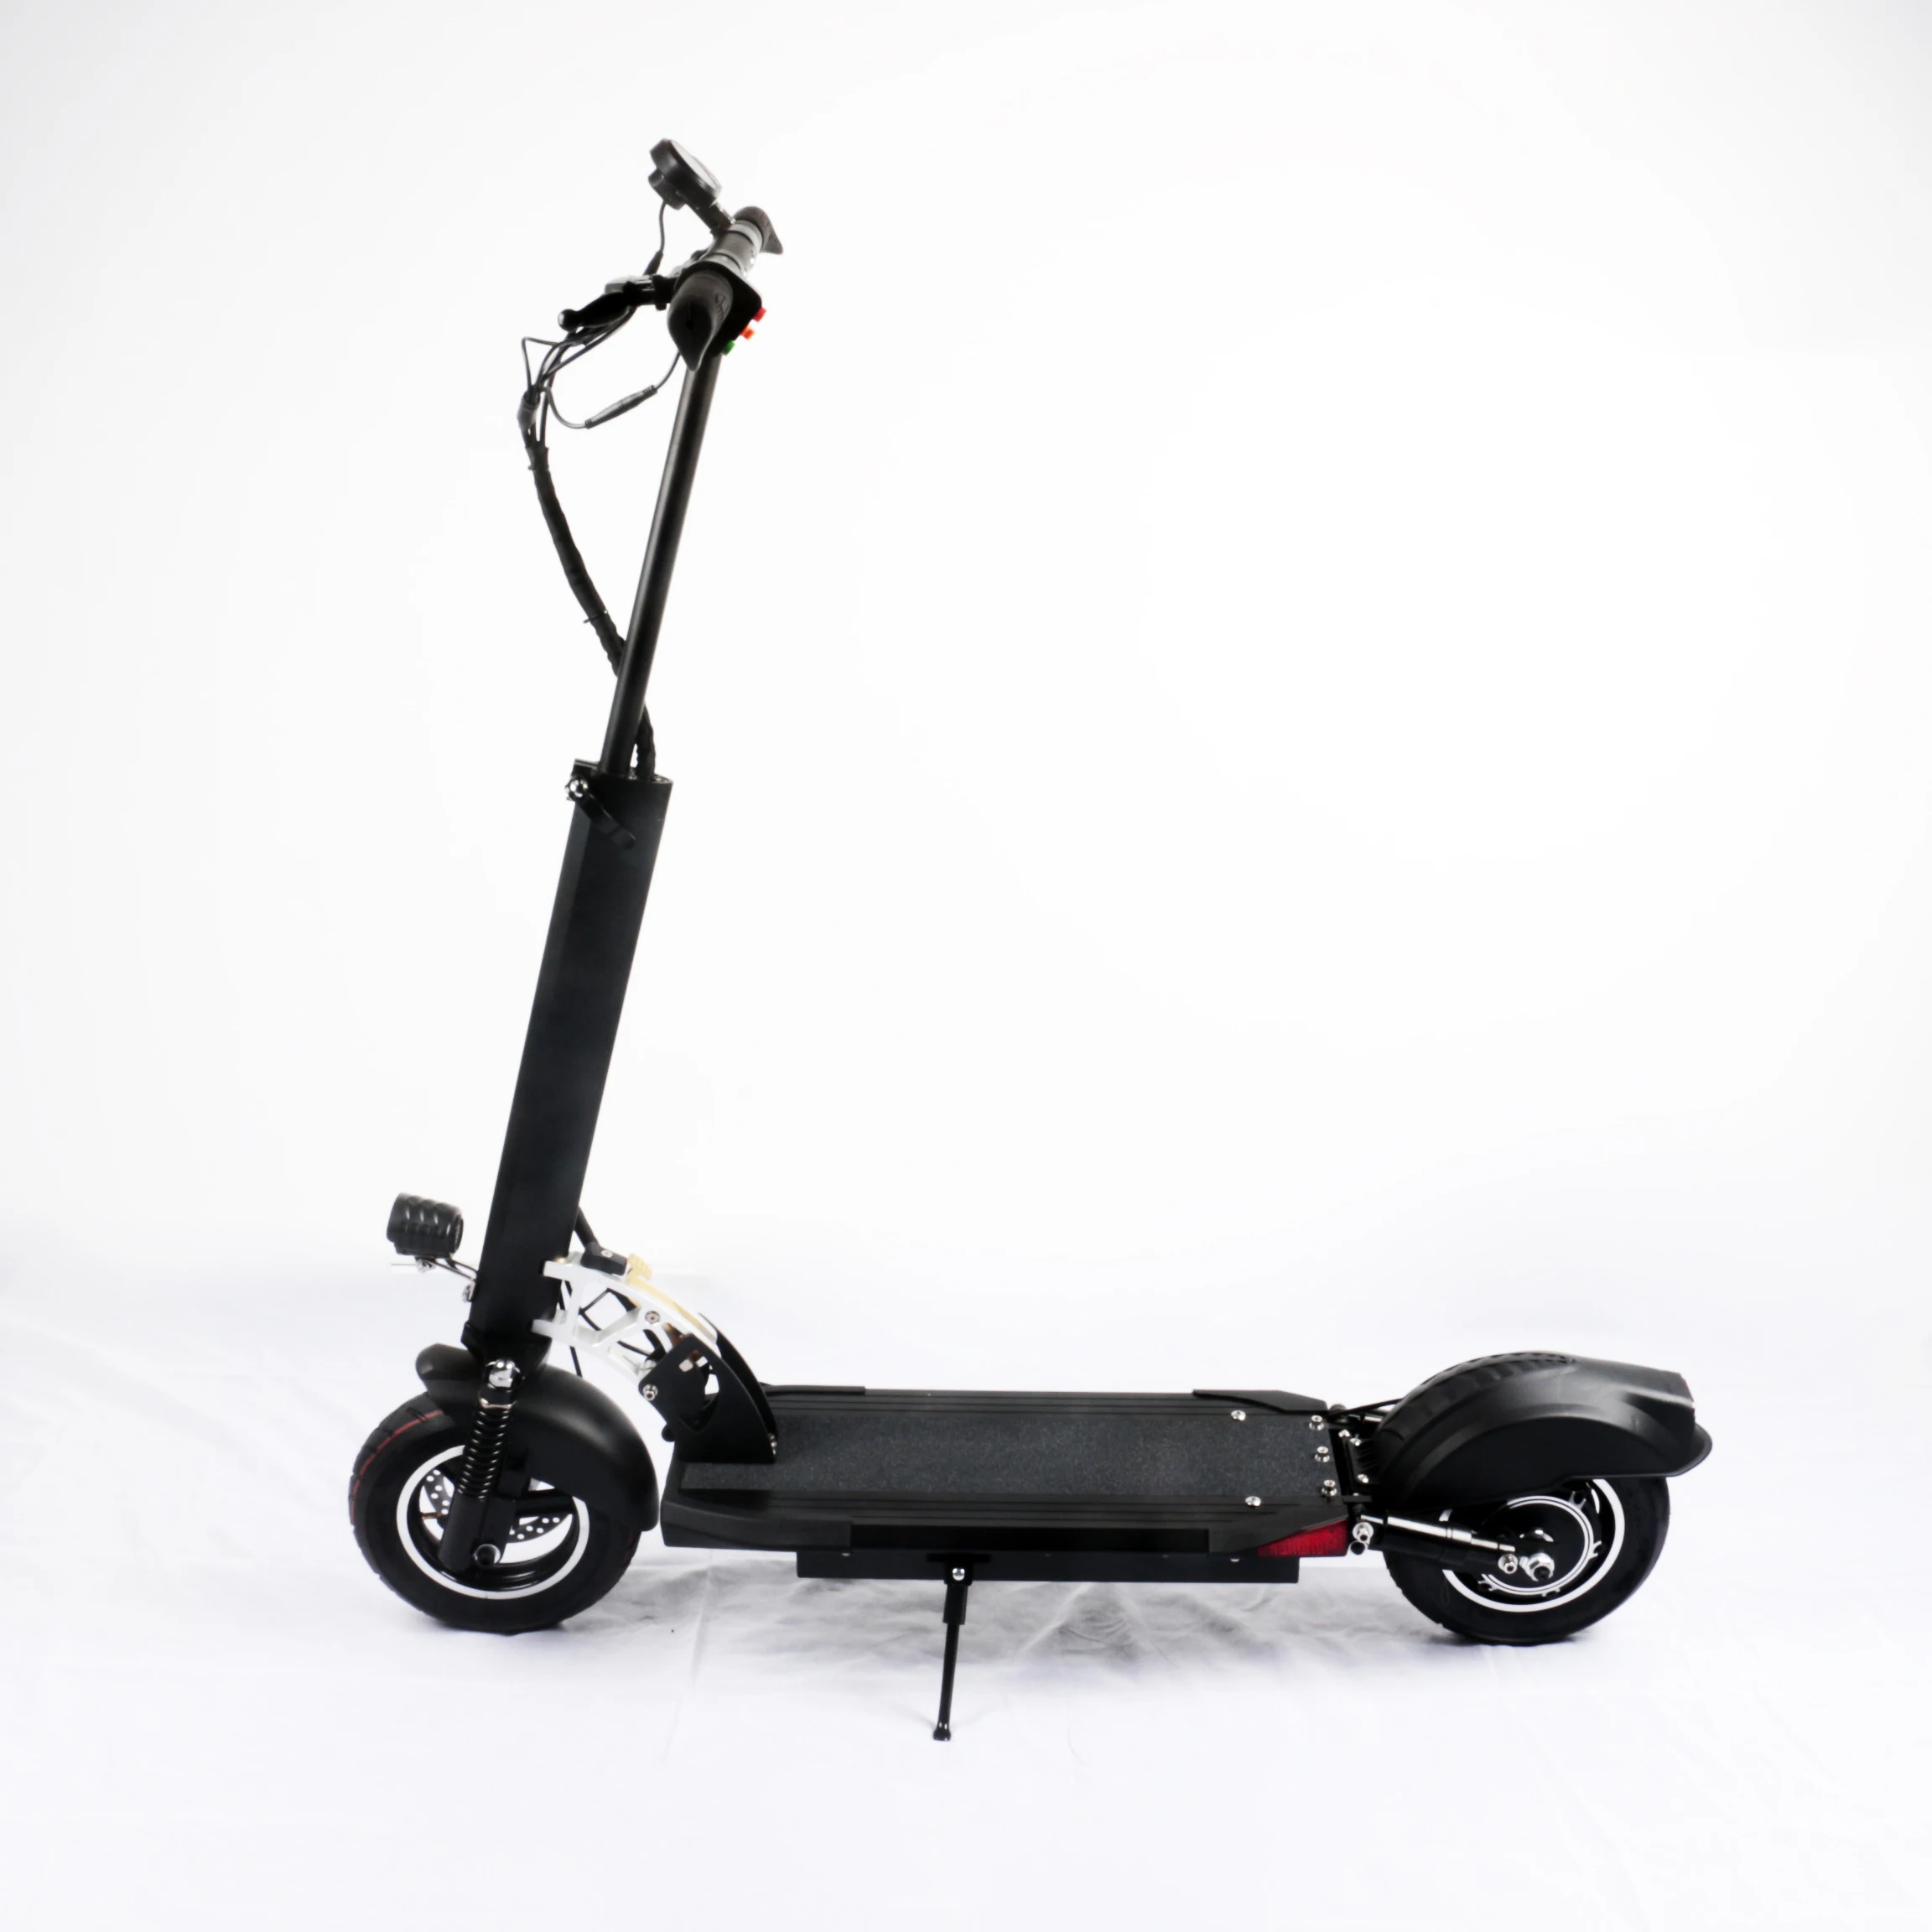 

10 inch 2 wheels easy carry adult long range 48V 500W foldable electric scooter, Black,,white